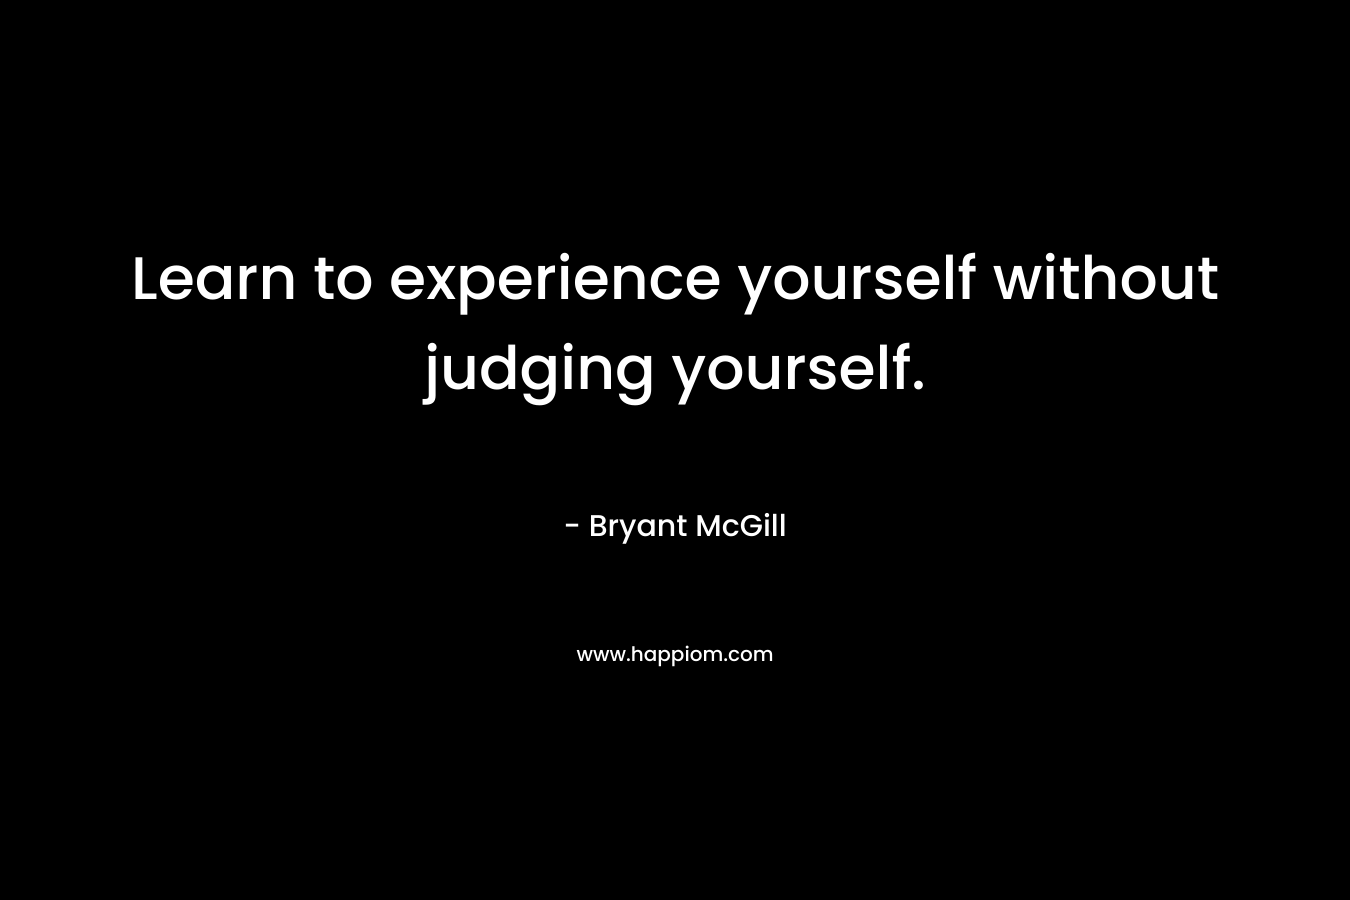 Learn to experience yourself without judging yourself.